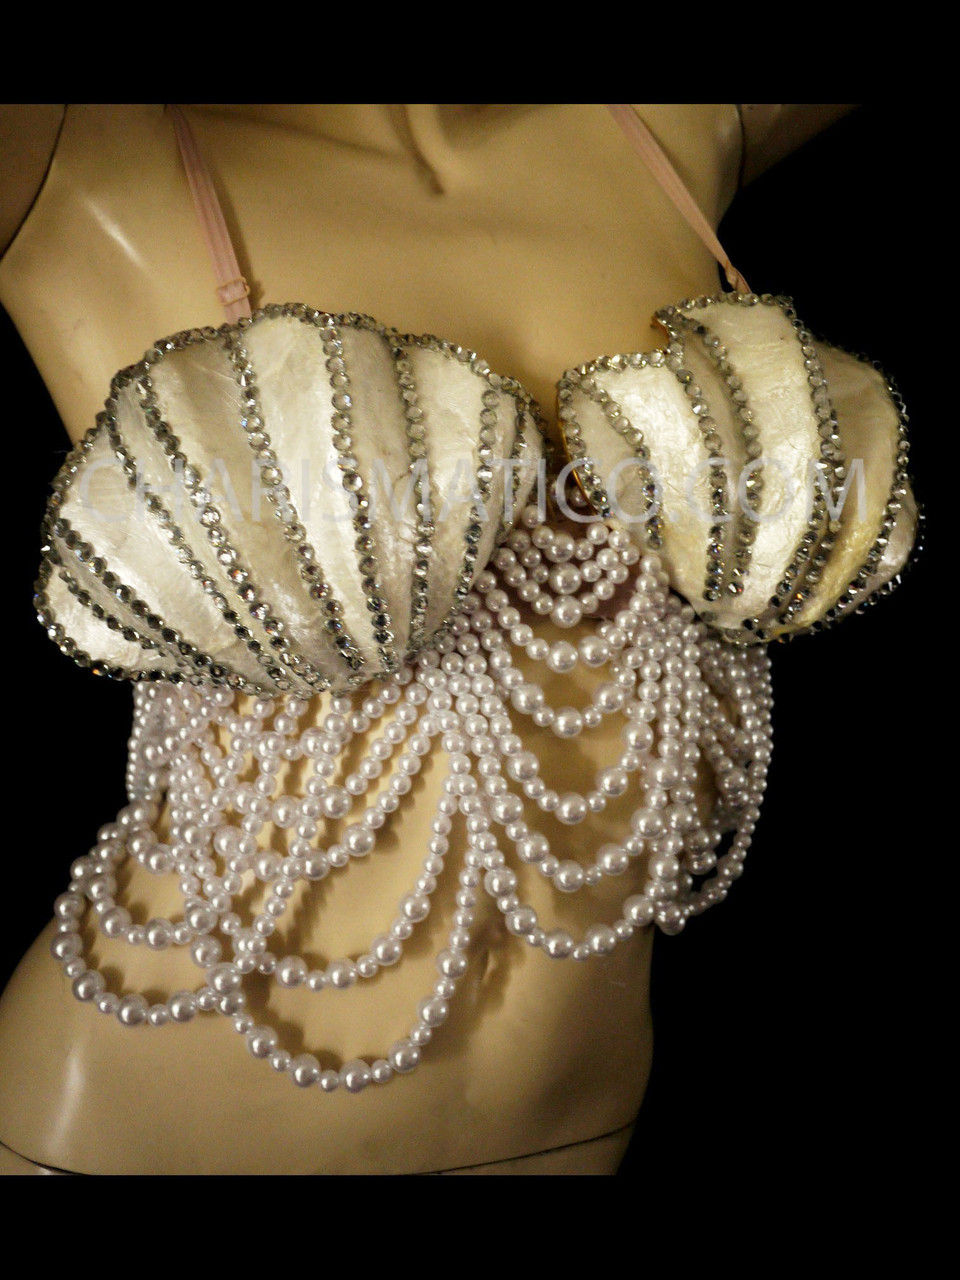 DIY Swimmable Glittery Mermaid Bra With Pearls Beads and Real